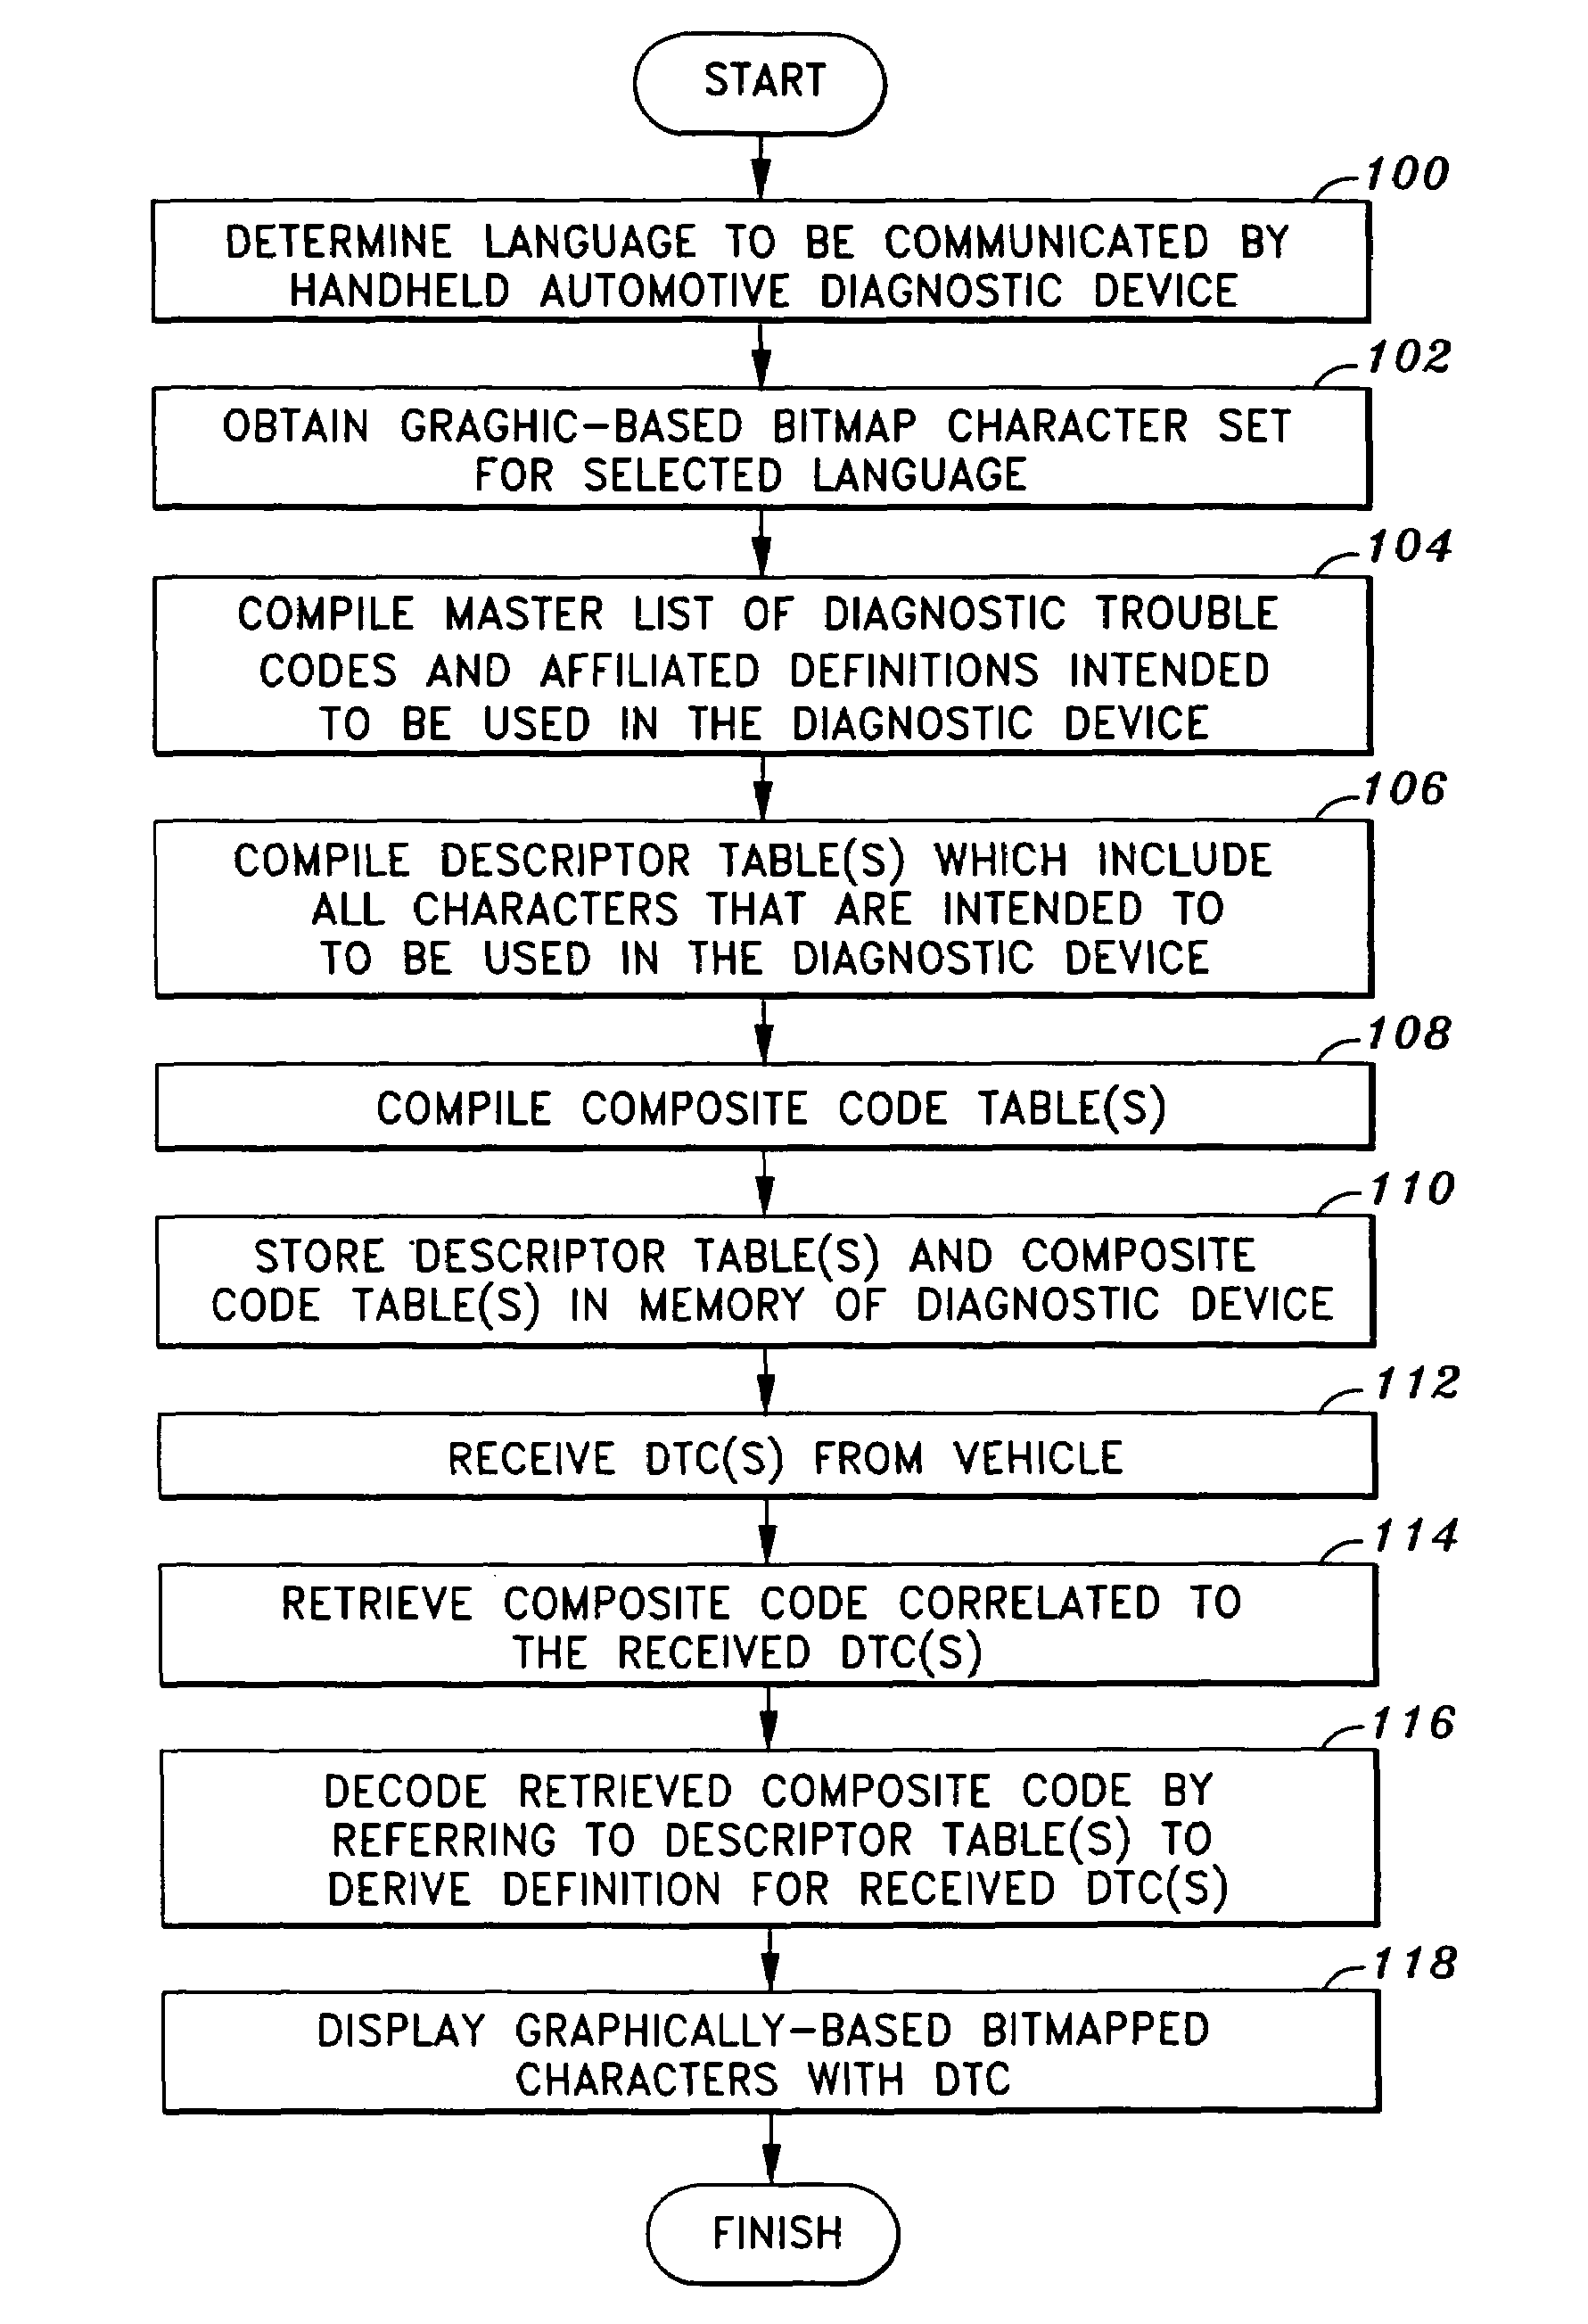 Handheld diagnostic device and method for displaying bitmapped graphic characters utilizing a condensed bitmap character library